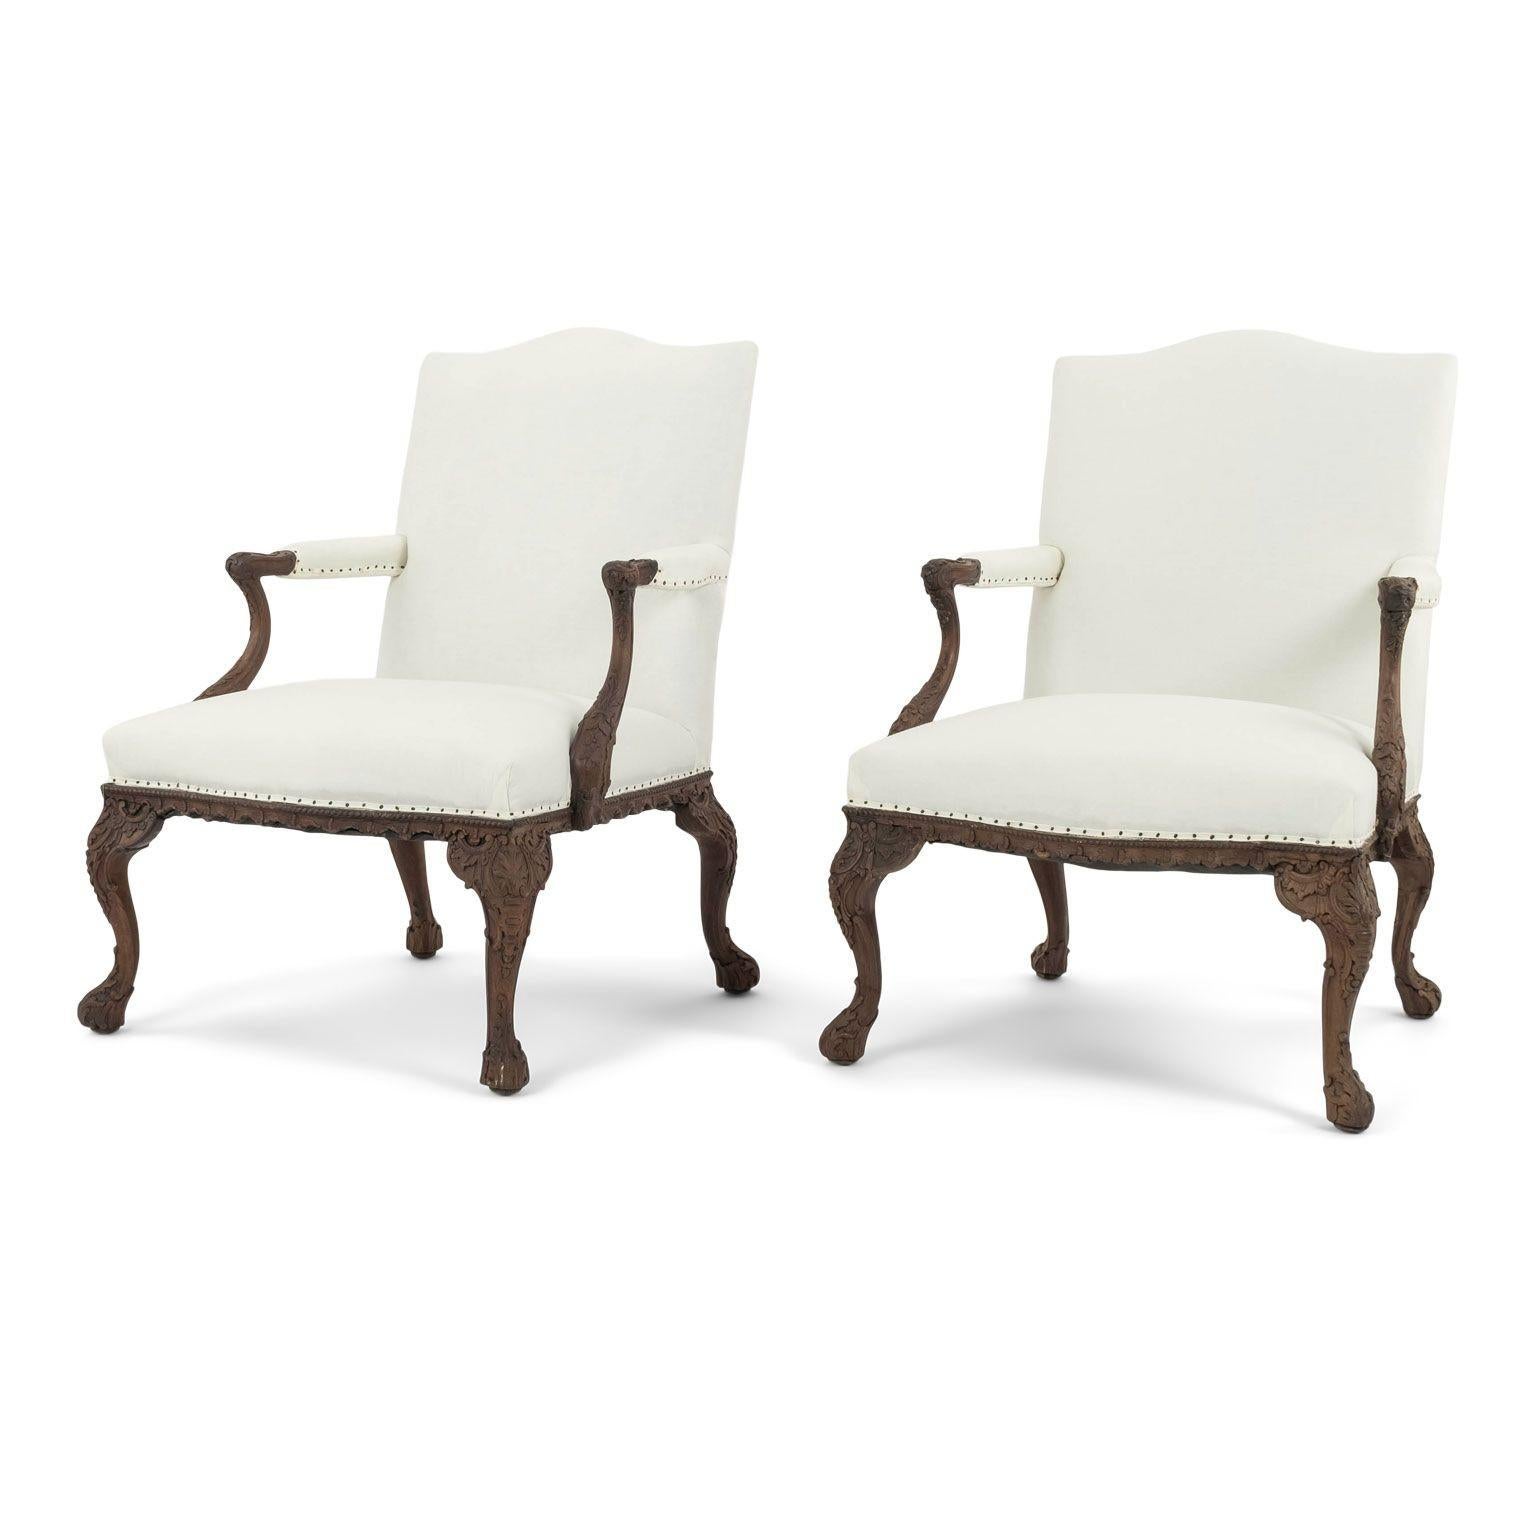 Pair of intricately hand-carved rococo style fauteuils dating to the 19th century. French armchairs hand-carved in walnut and newly upholstered in white muslin. Armchairs sold together and priced $7,800 for the pair.

Note: Regional differences in